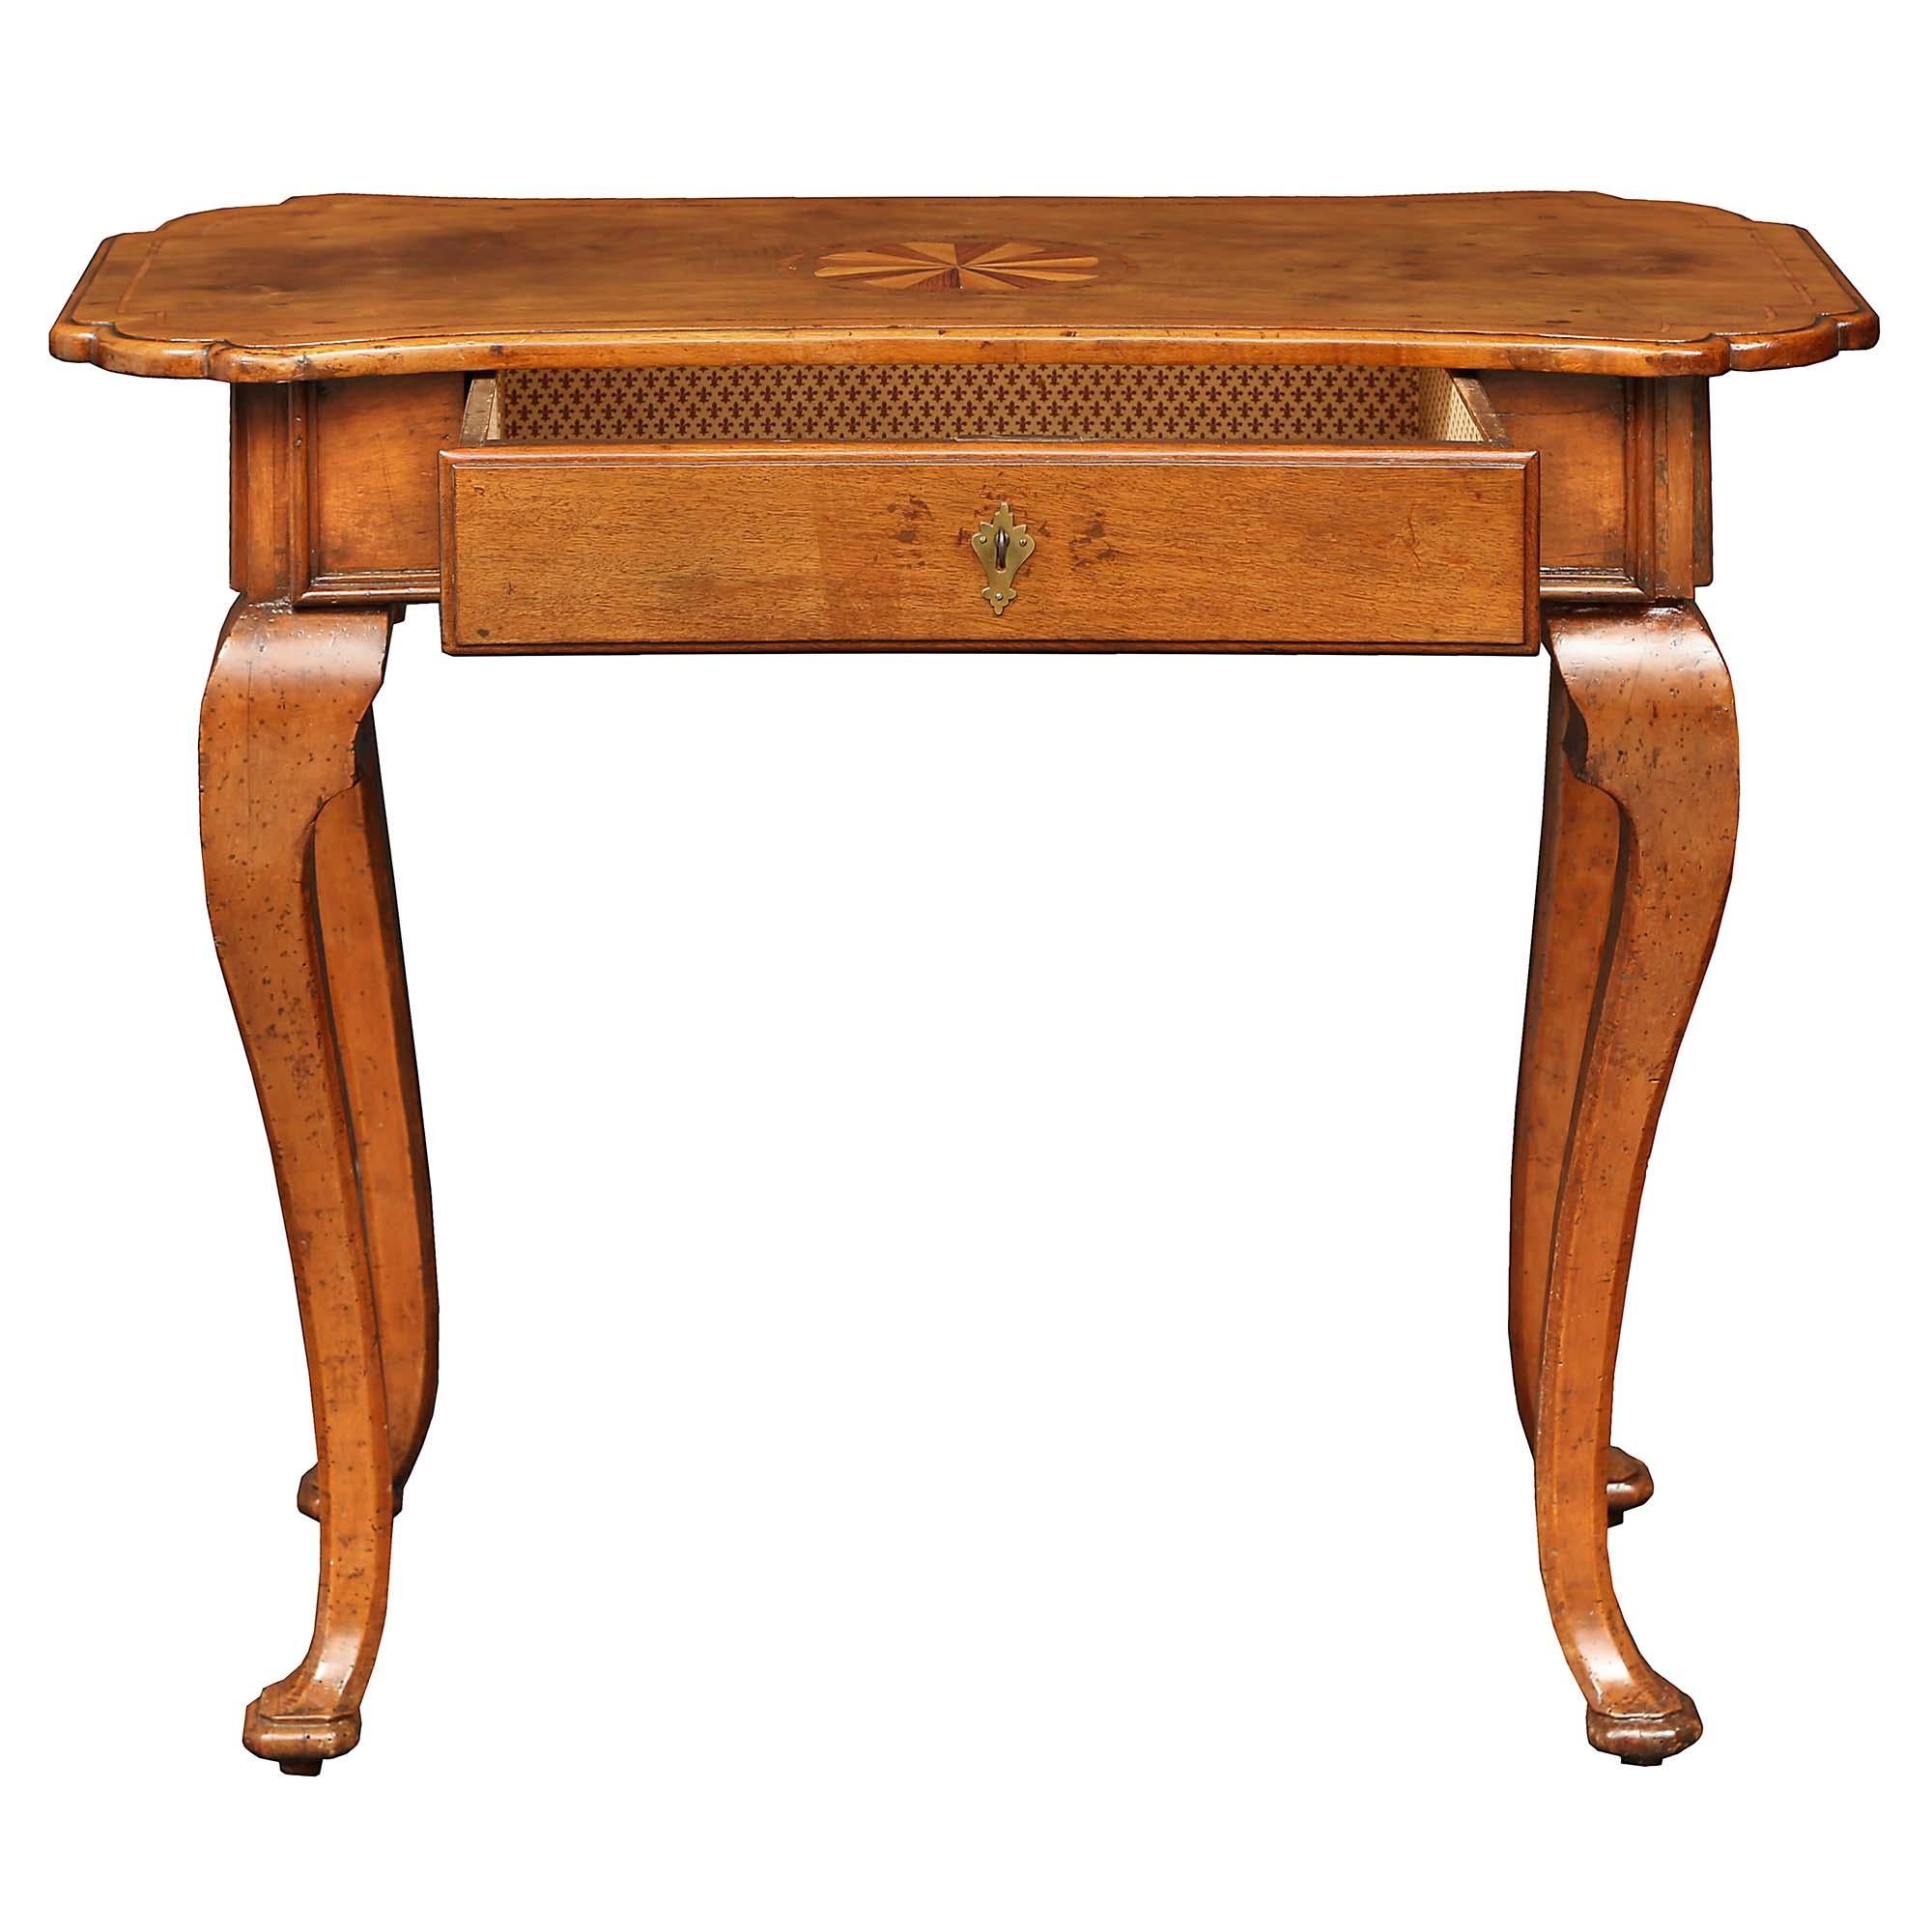 18th Century and Earlier Italian 18th Century Louis XV Period Walnut Side Table from the Veneto Region For Sale